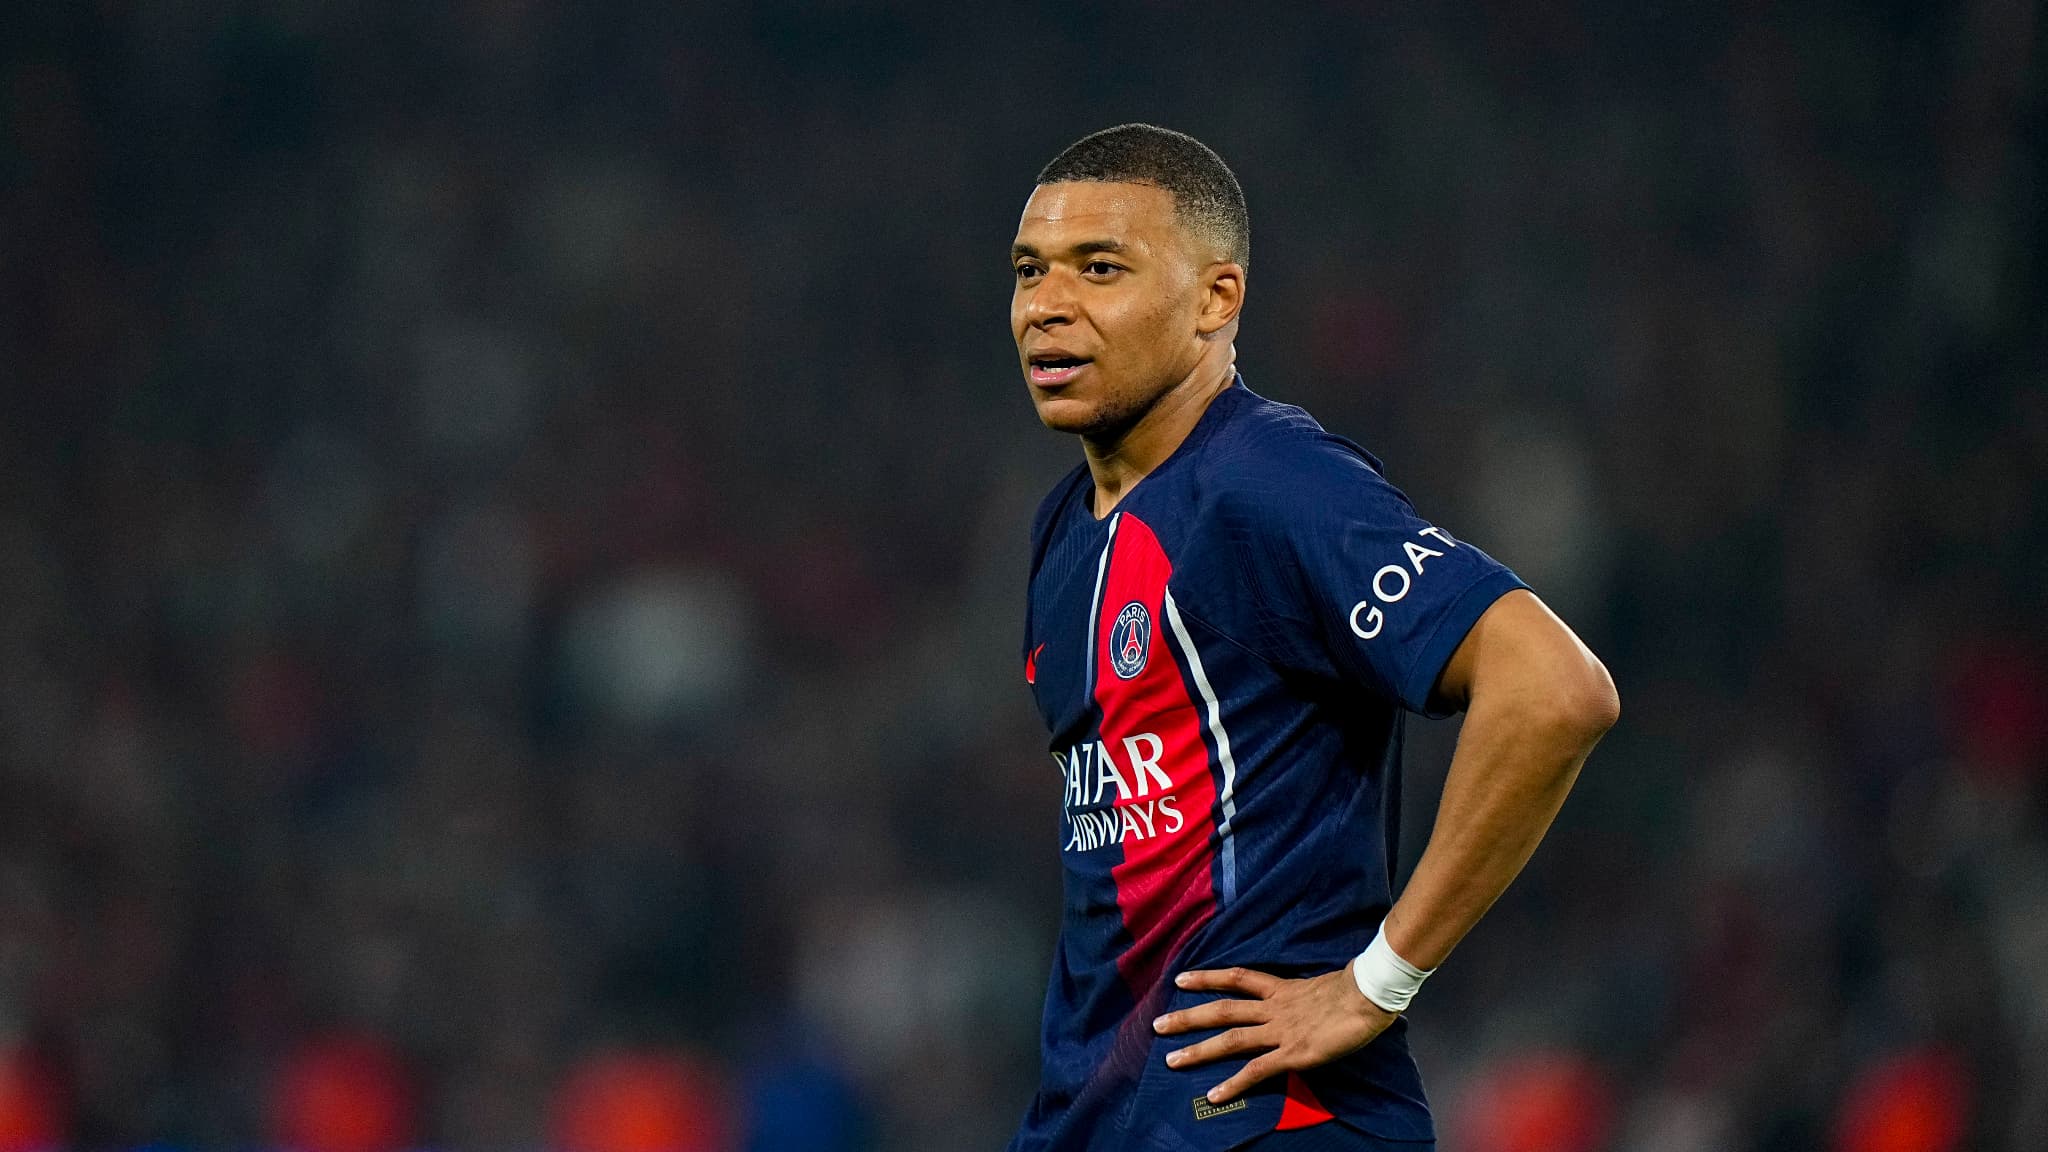 “I am the first to be targeted”, Mbappé’s self-criticism on the lack of effectiveness